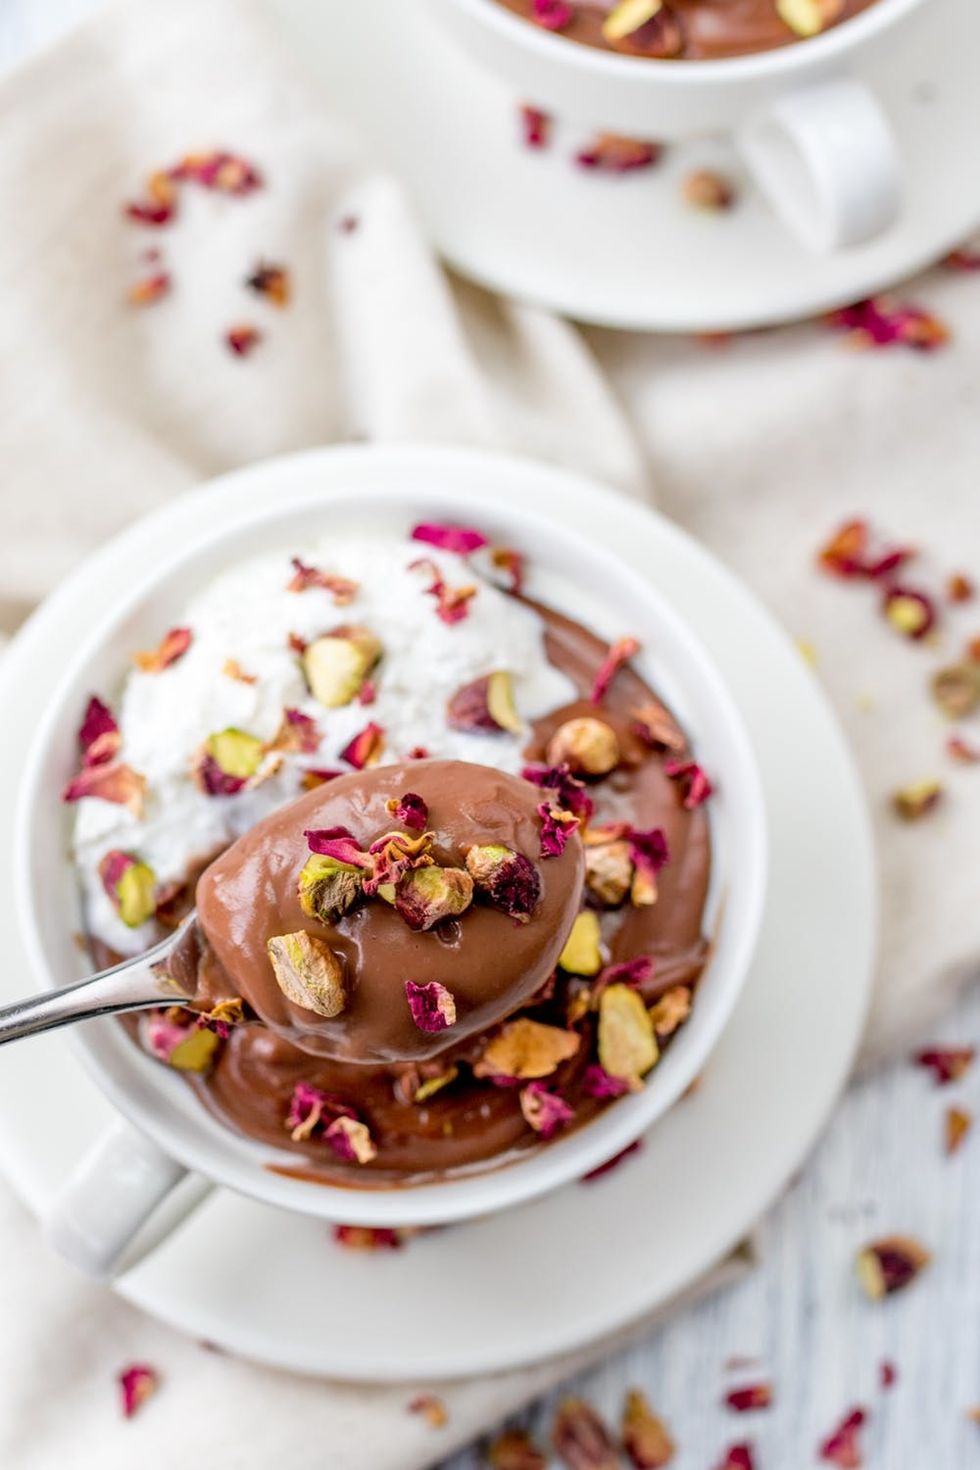 We're Going Nuts For National Pistachio Day With This Rose And Pistachio Hot Chocolate!